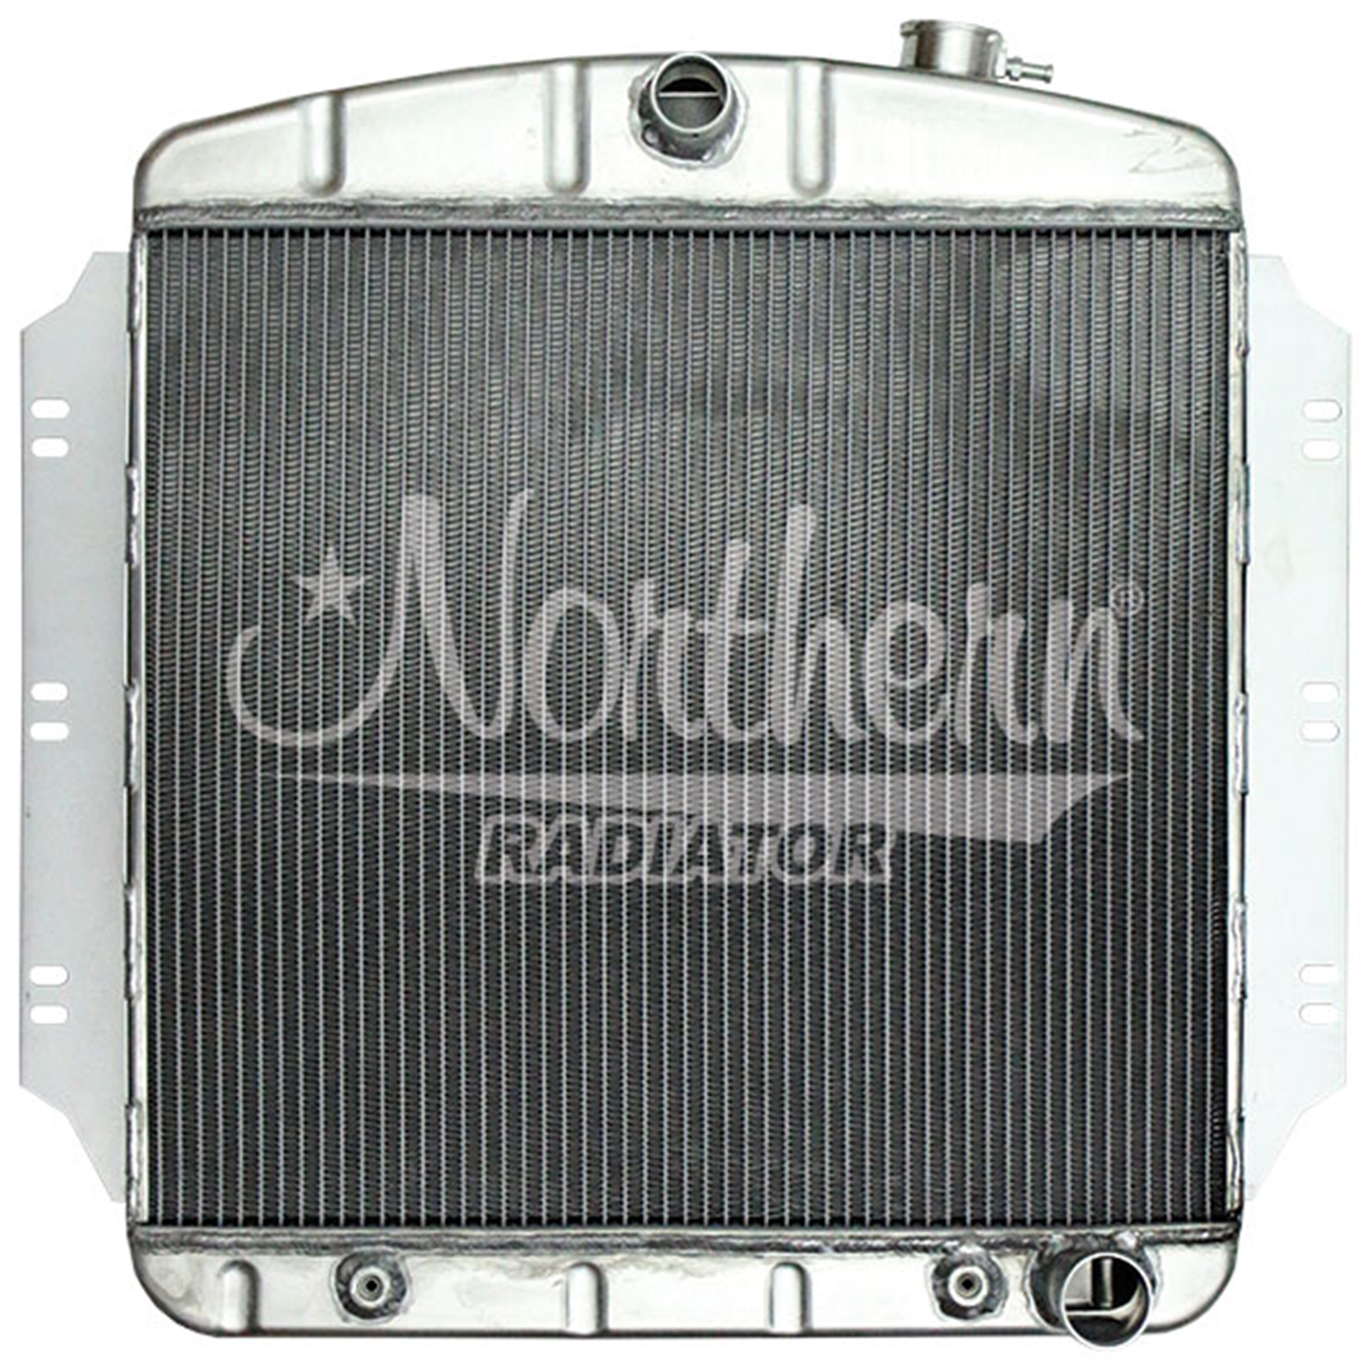 60-62 CHEVY TRUCK MUSCLE CAR RADIATOR